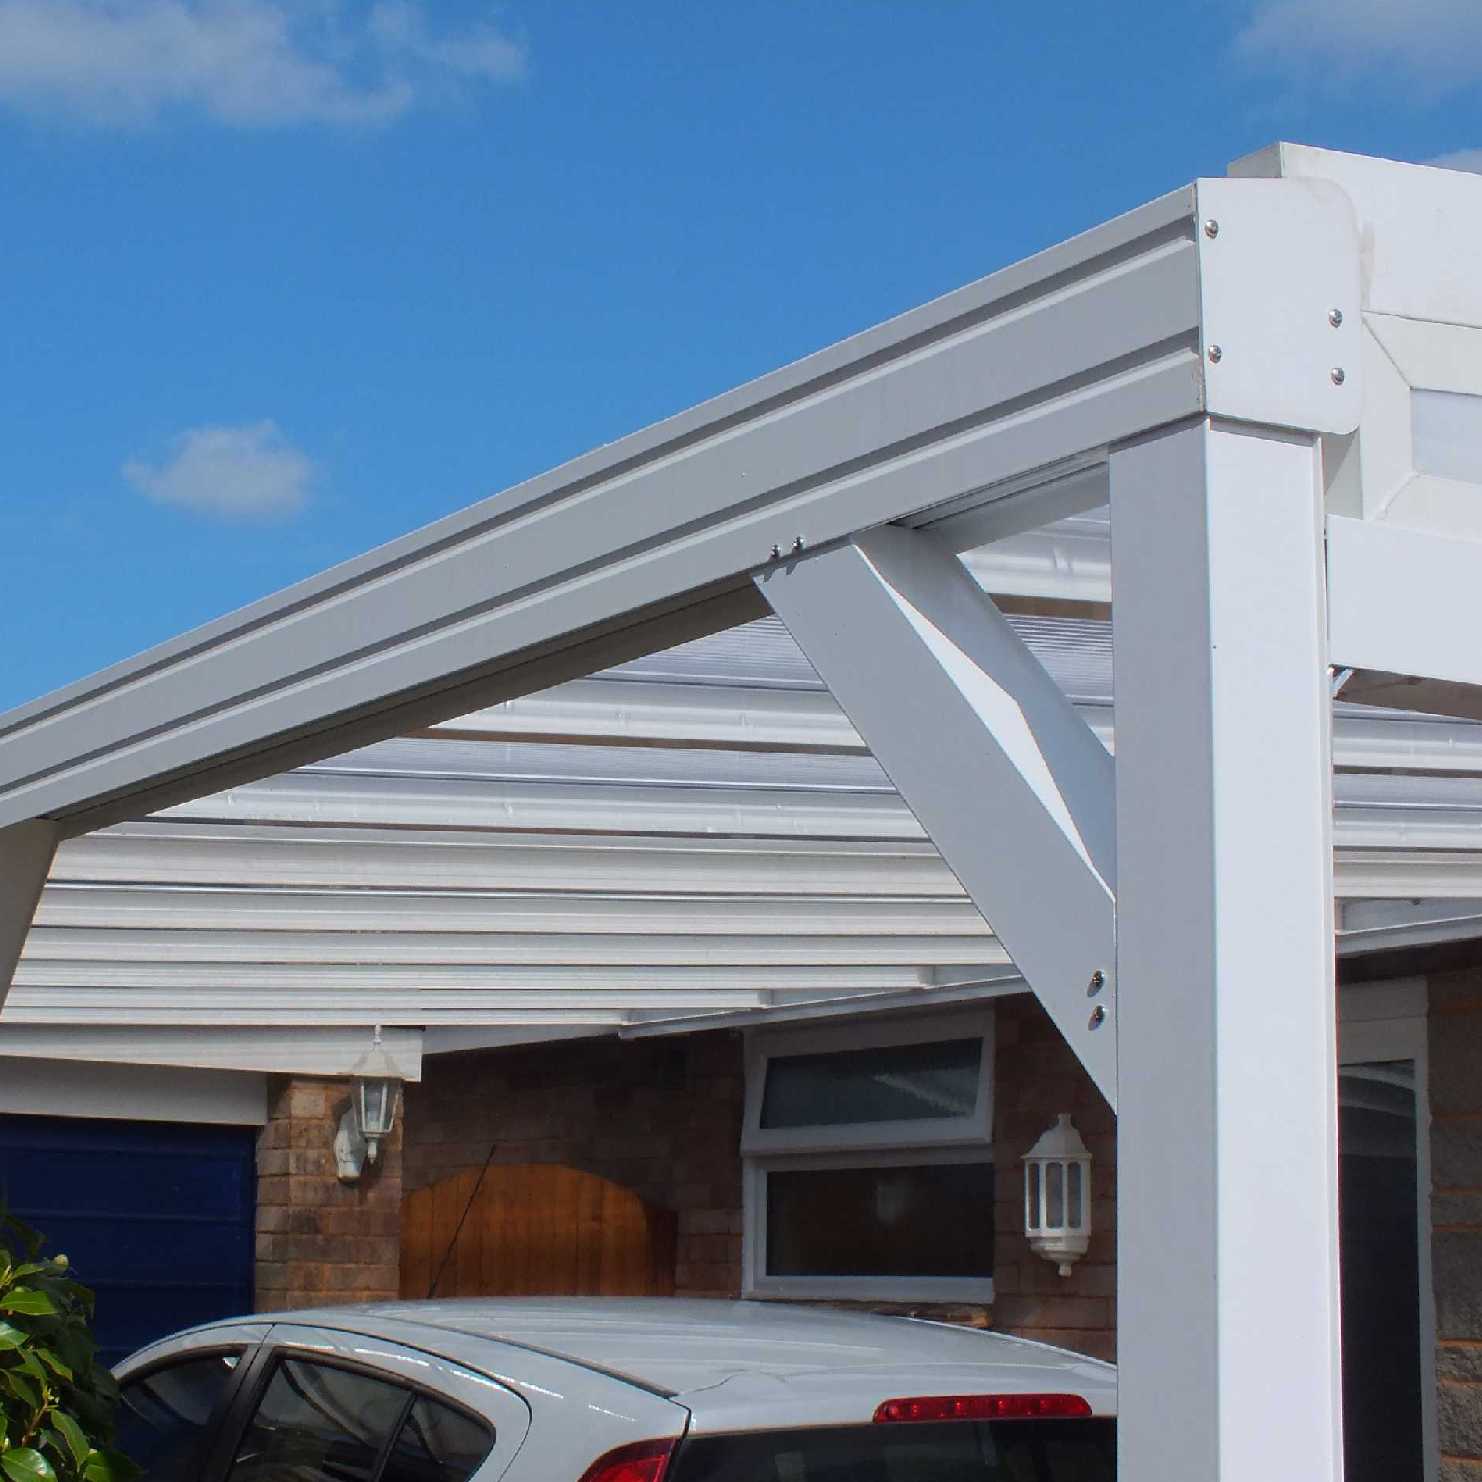 Great deals on Omega Smart Lean-To Canopy, White with 16mm Polycarbonate Glazing - 10.6m (W) x 3.0m (P), (5) Supporting Posts